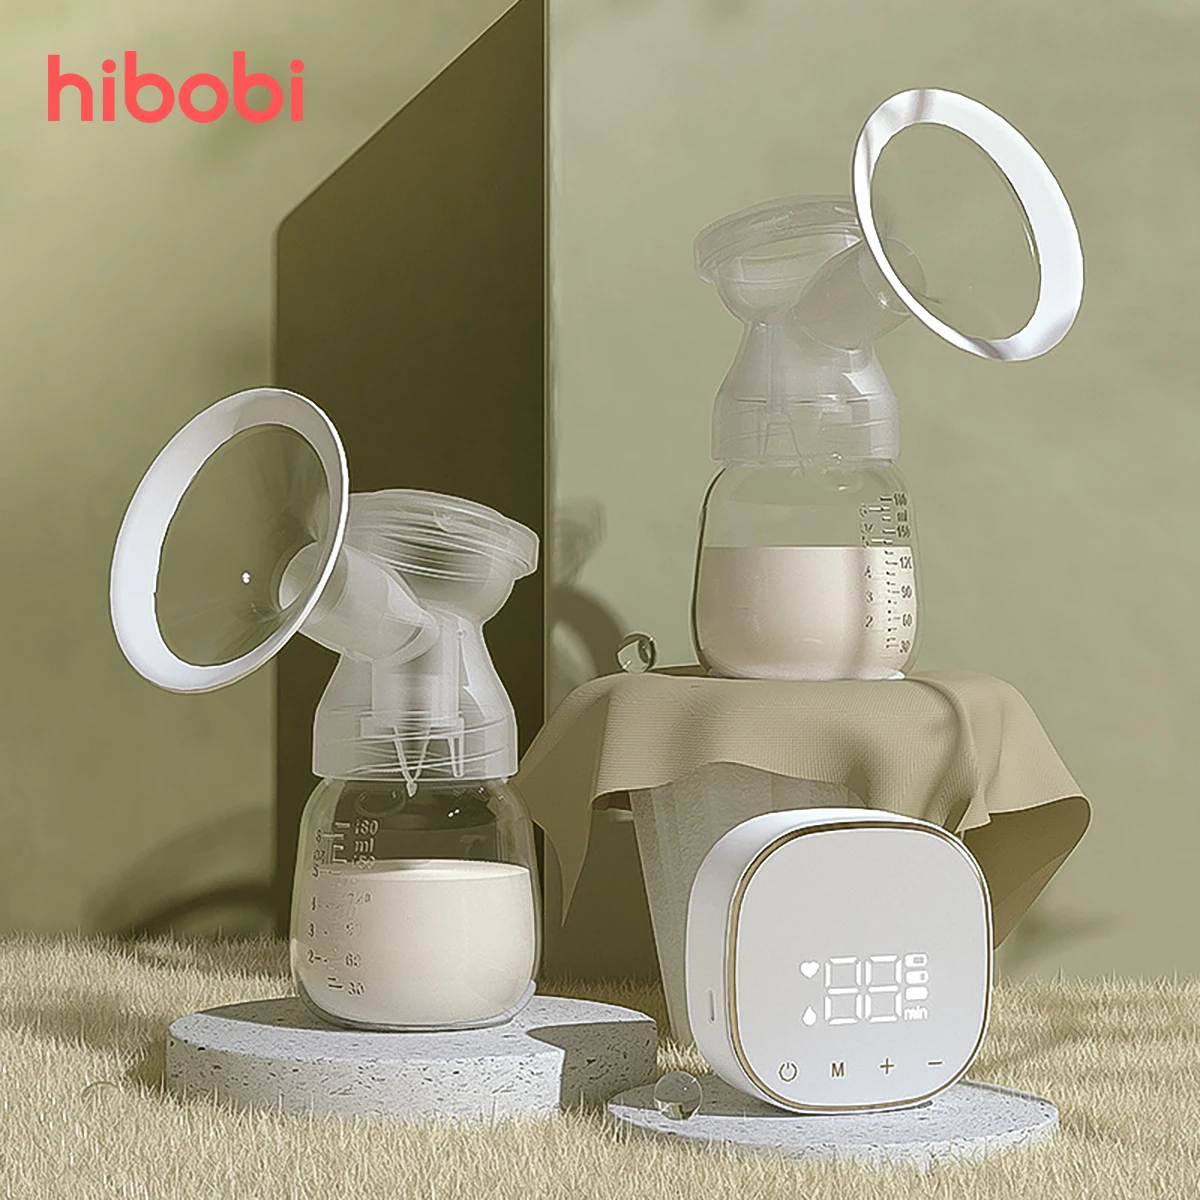 hibobi Electric Breast Pump LED Display Hands-Free Portable Milk Extractor 3 Modes Silent Automatic Milker